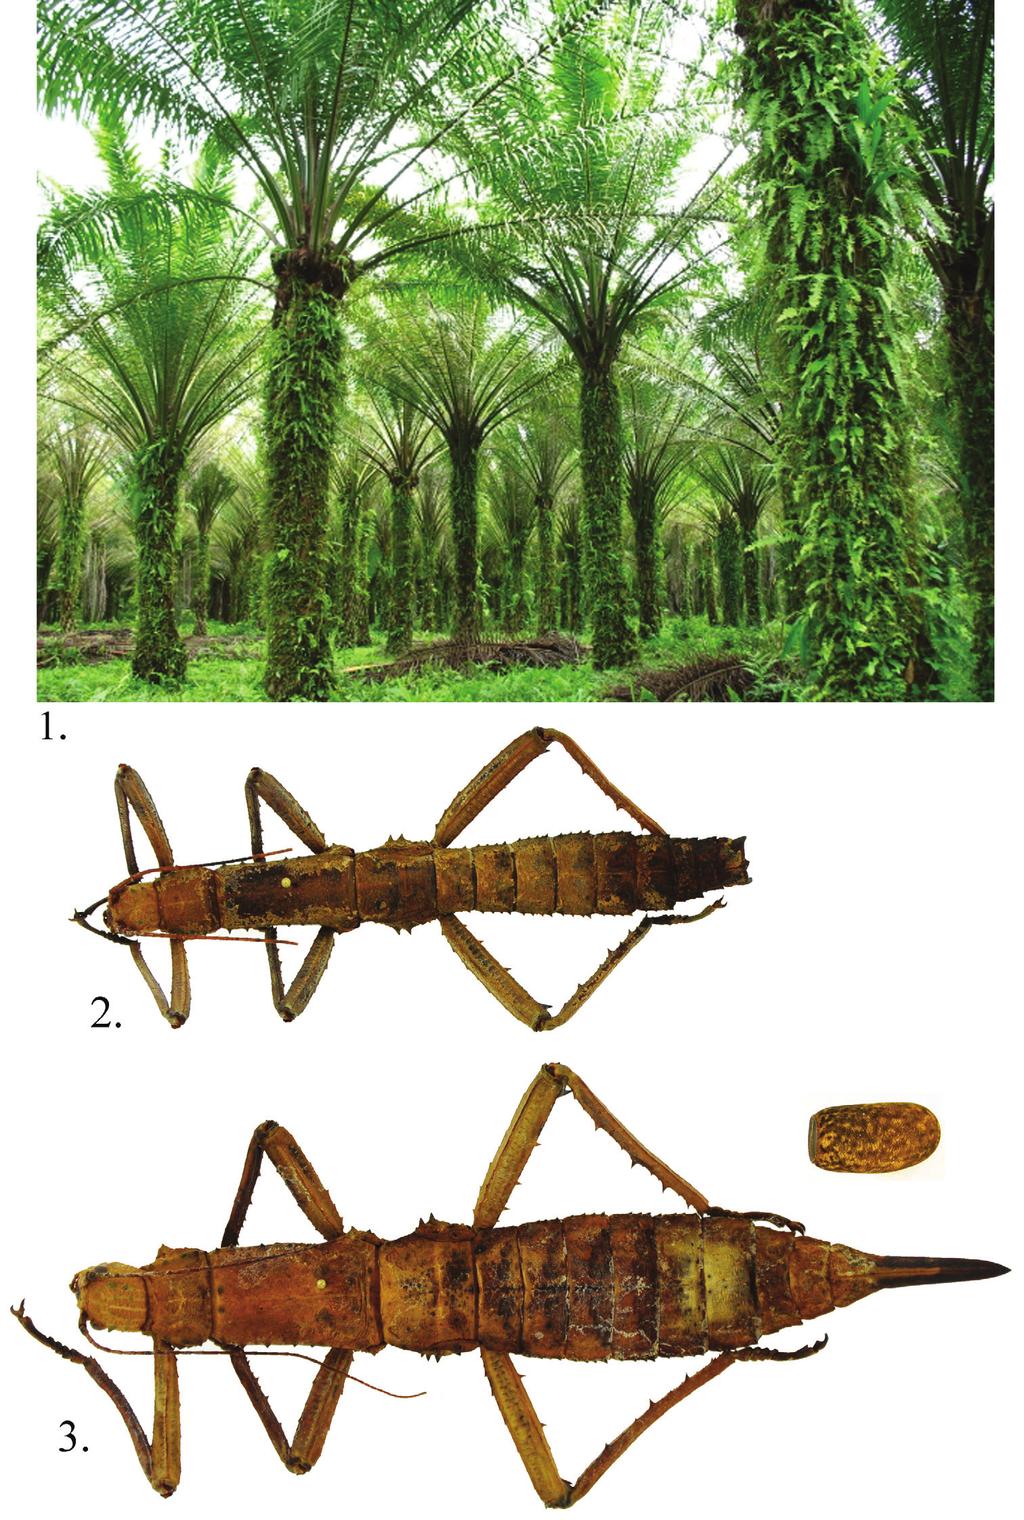 20 Lynn S. Kimsey et al. / Journal of Hymenoptera Research 30: 19 28 (2013) Figures 1 3.